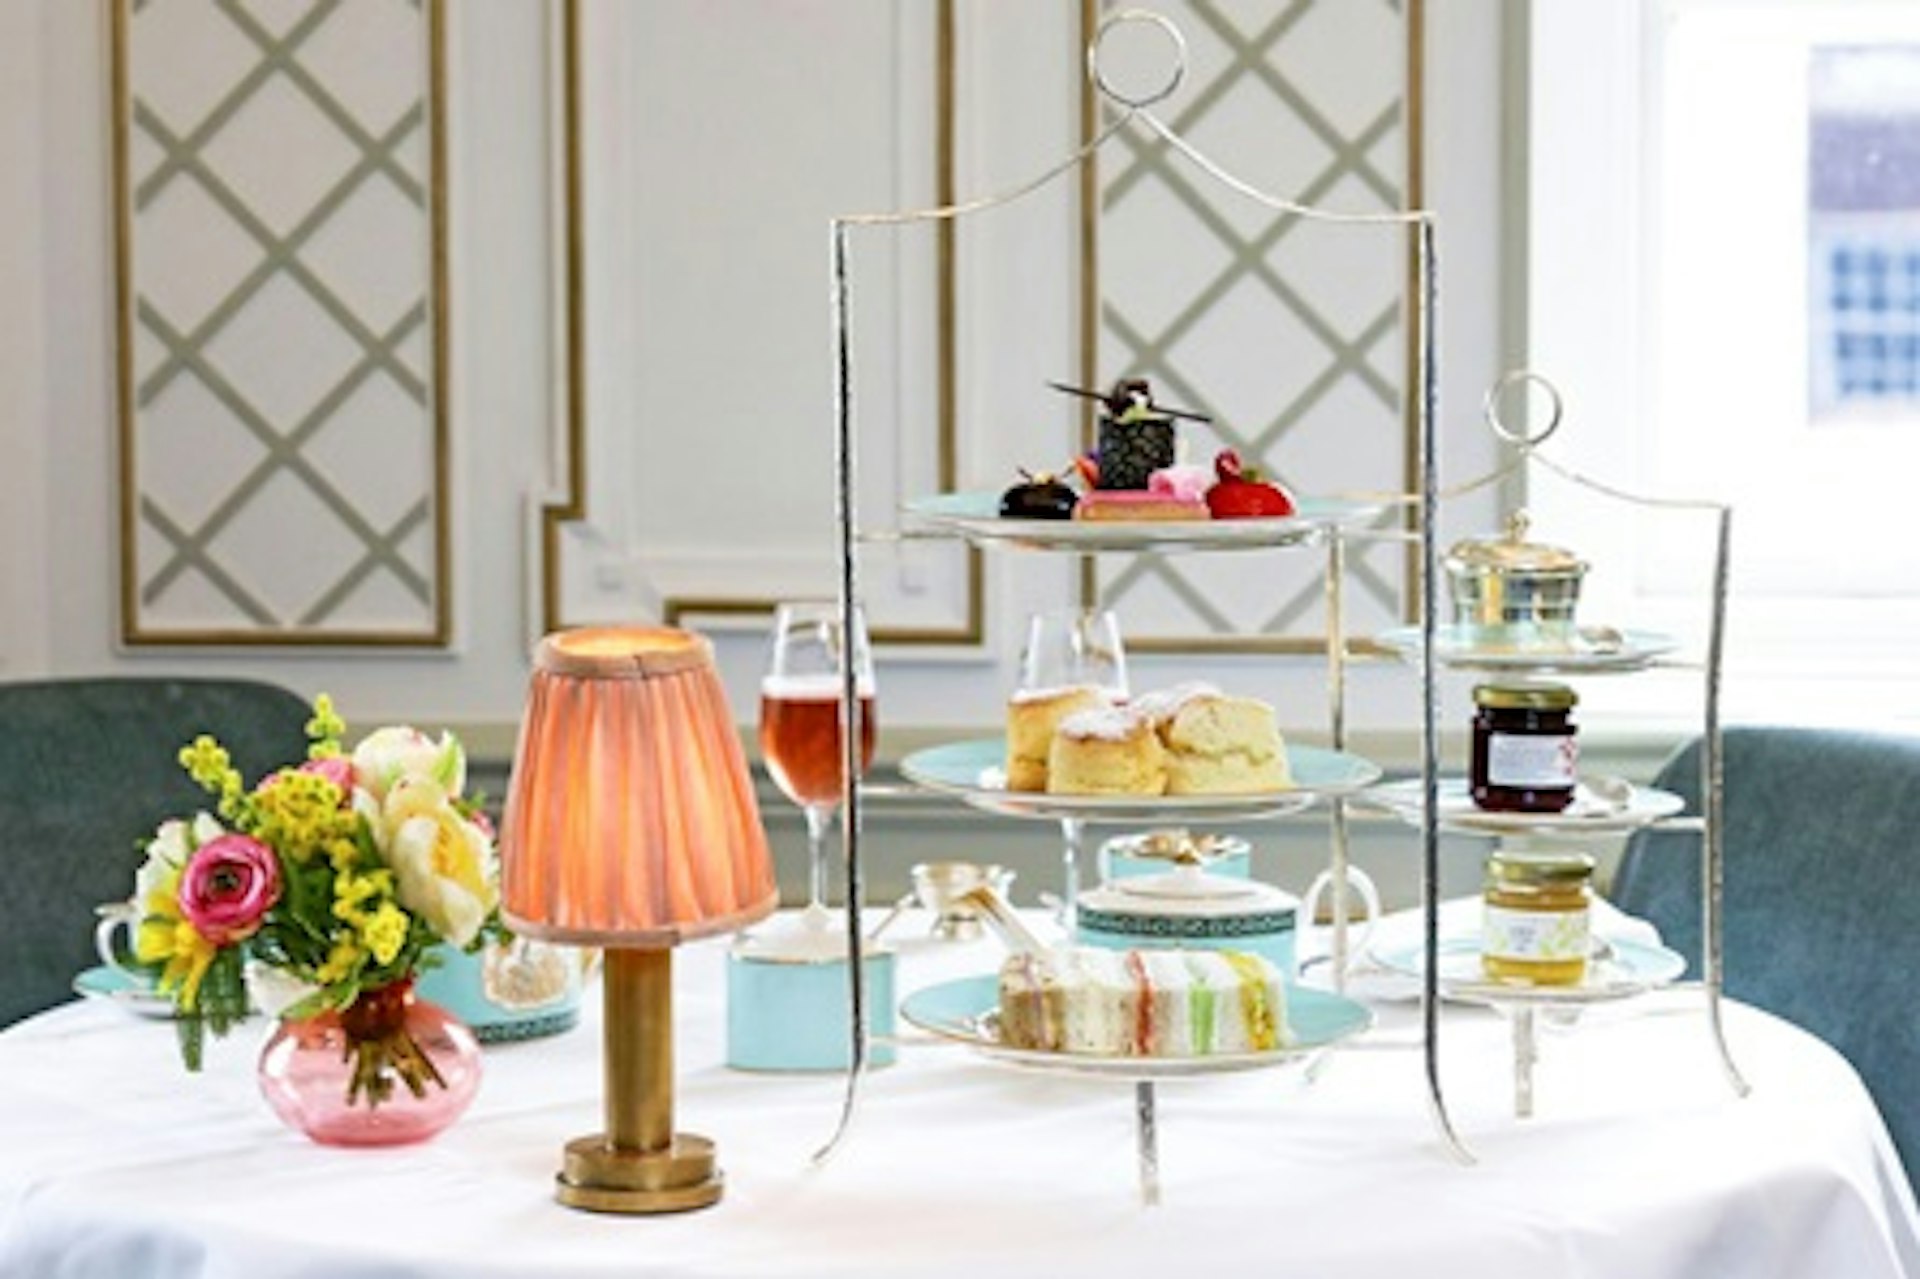 Fortnum & Mason Champagne Afternoon Tea for Two in The Diamond Jubilee Tea Salon 4